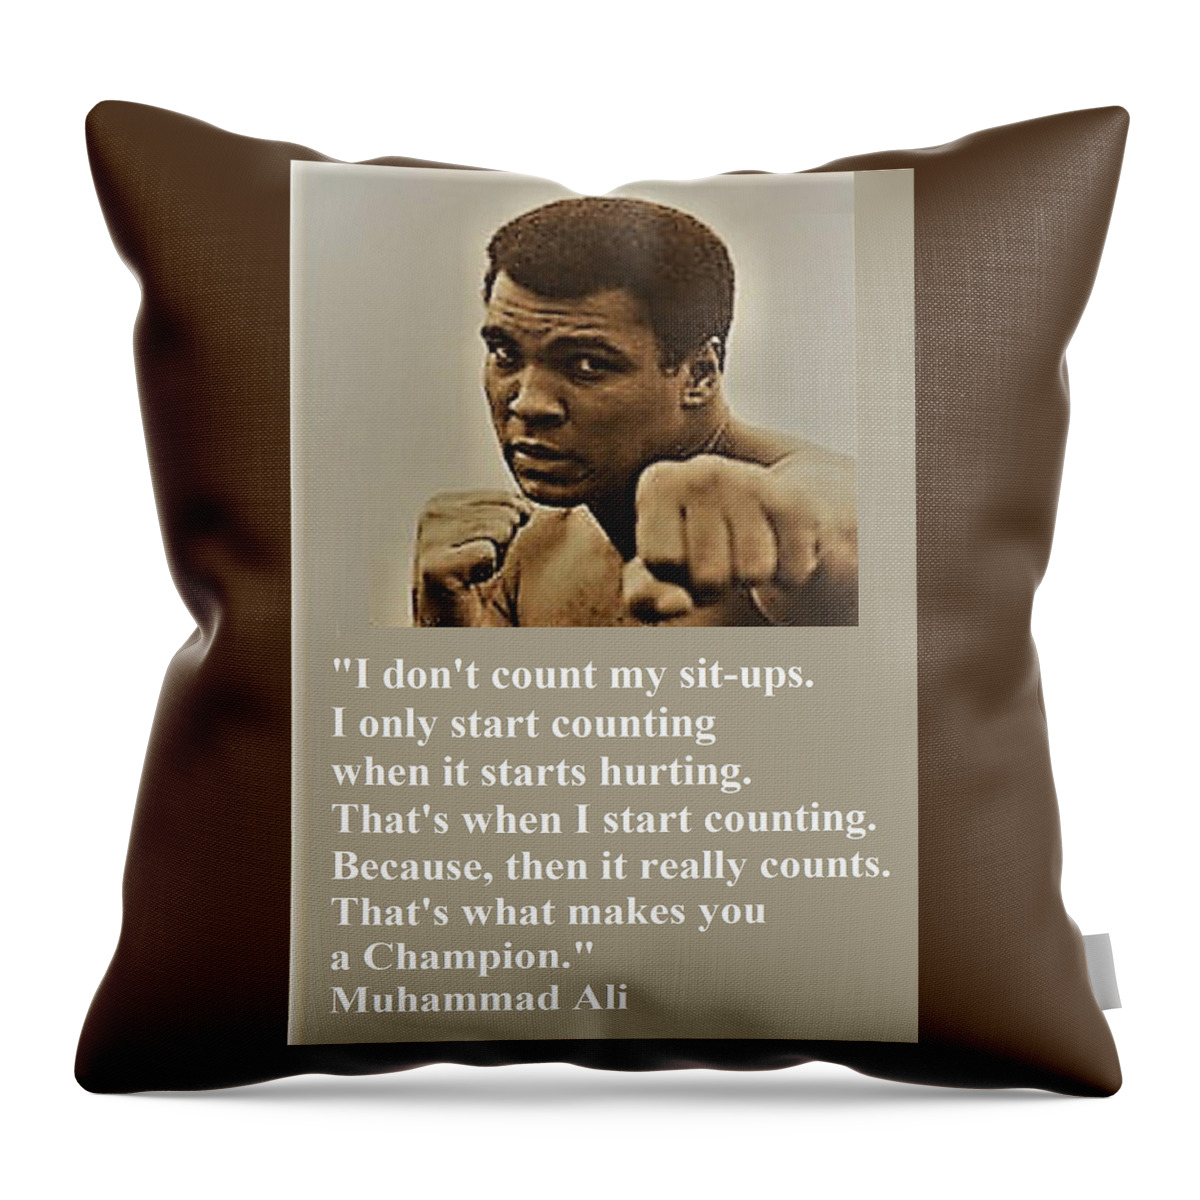 When It Counts Throw Pillow featuring the digital art When It Counts by Adenike AmenRa